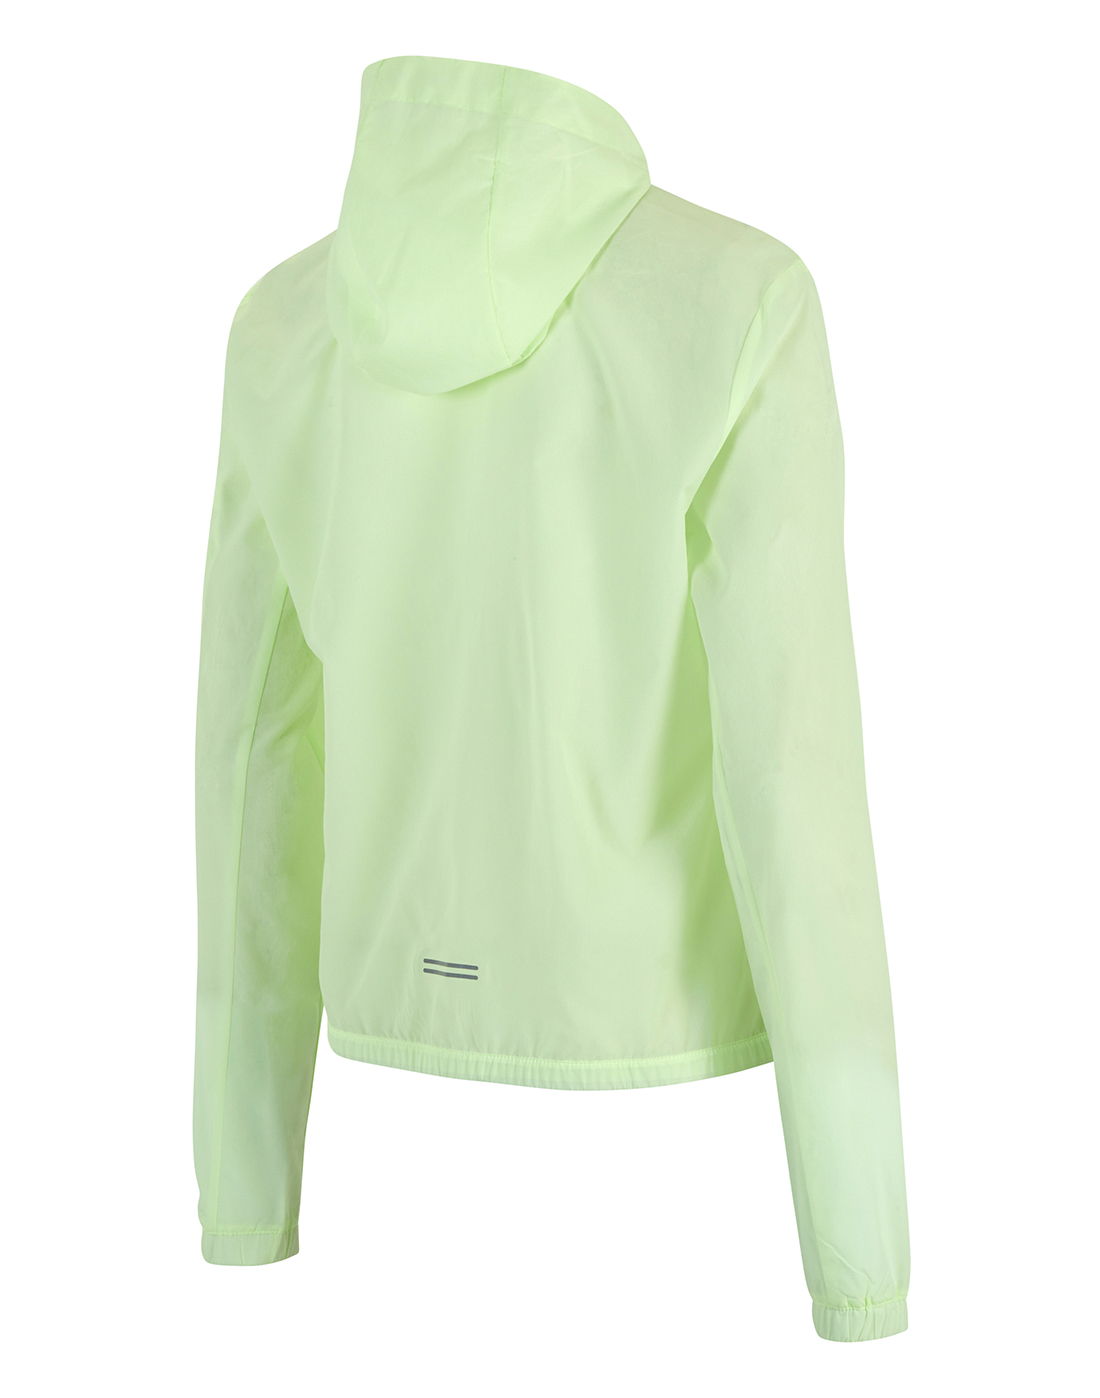 Womens Impossibly Light Jacket - Life Style Sports IE